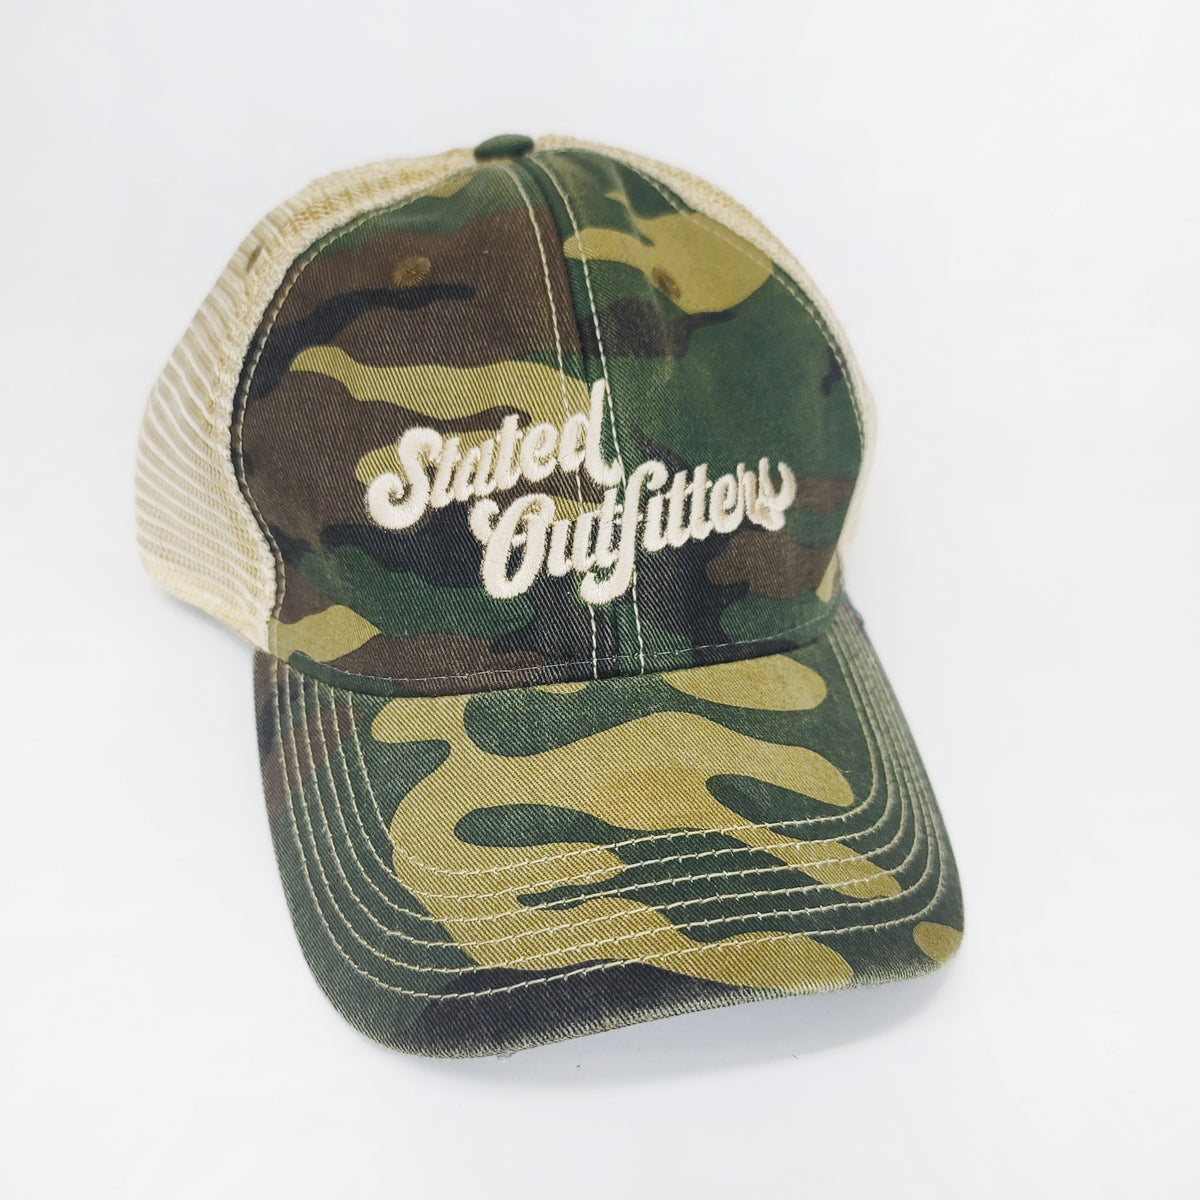 Stated Outfitters Embroidered Camo Hat